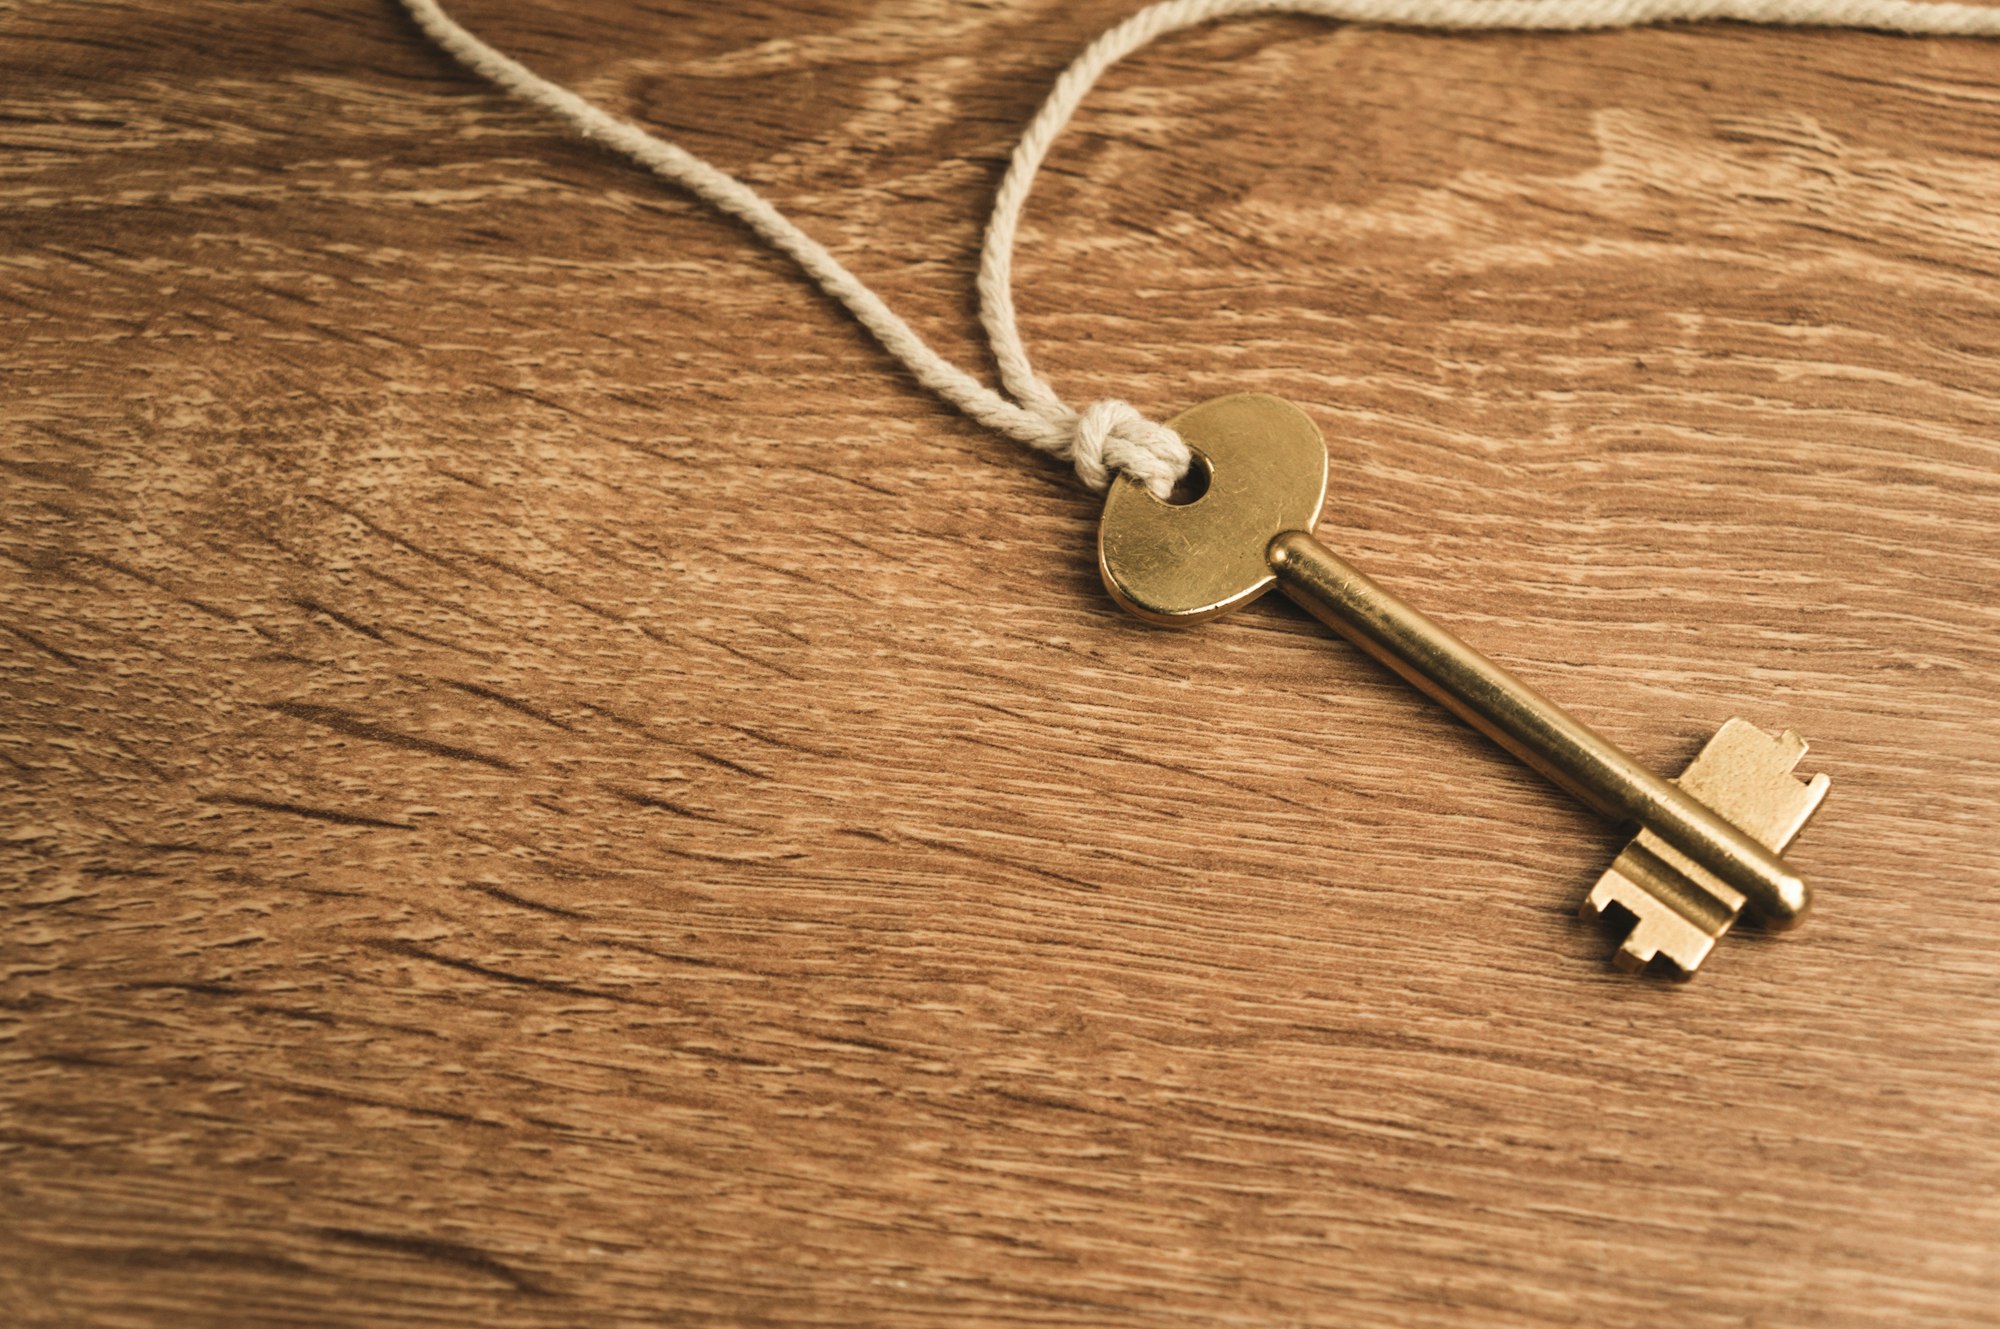 Golden key on rope on wooden background